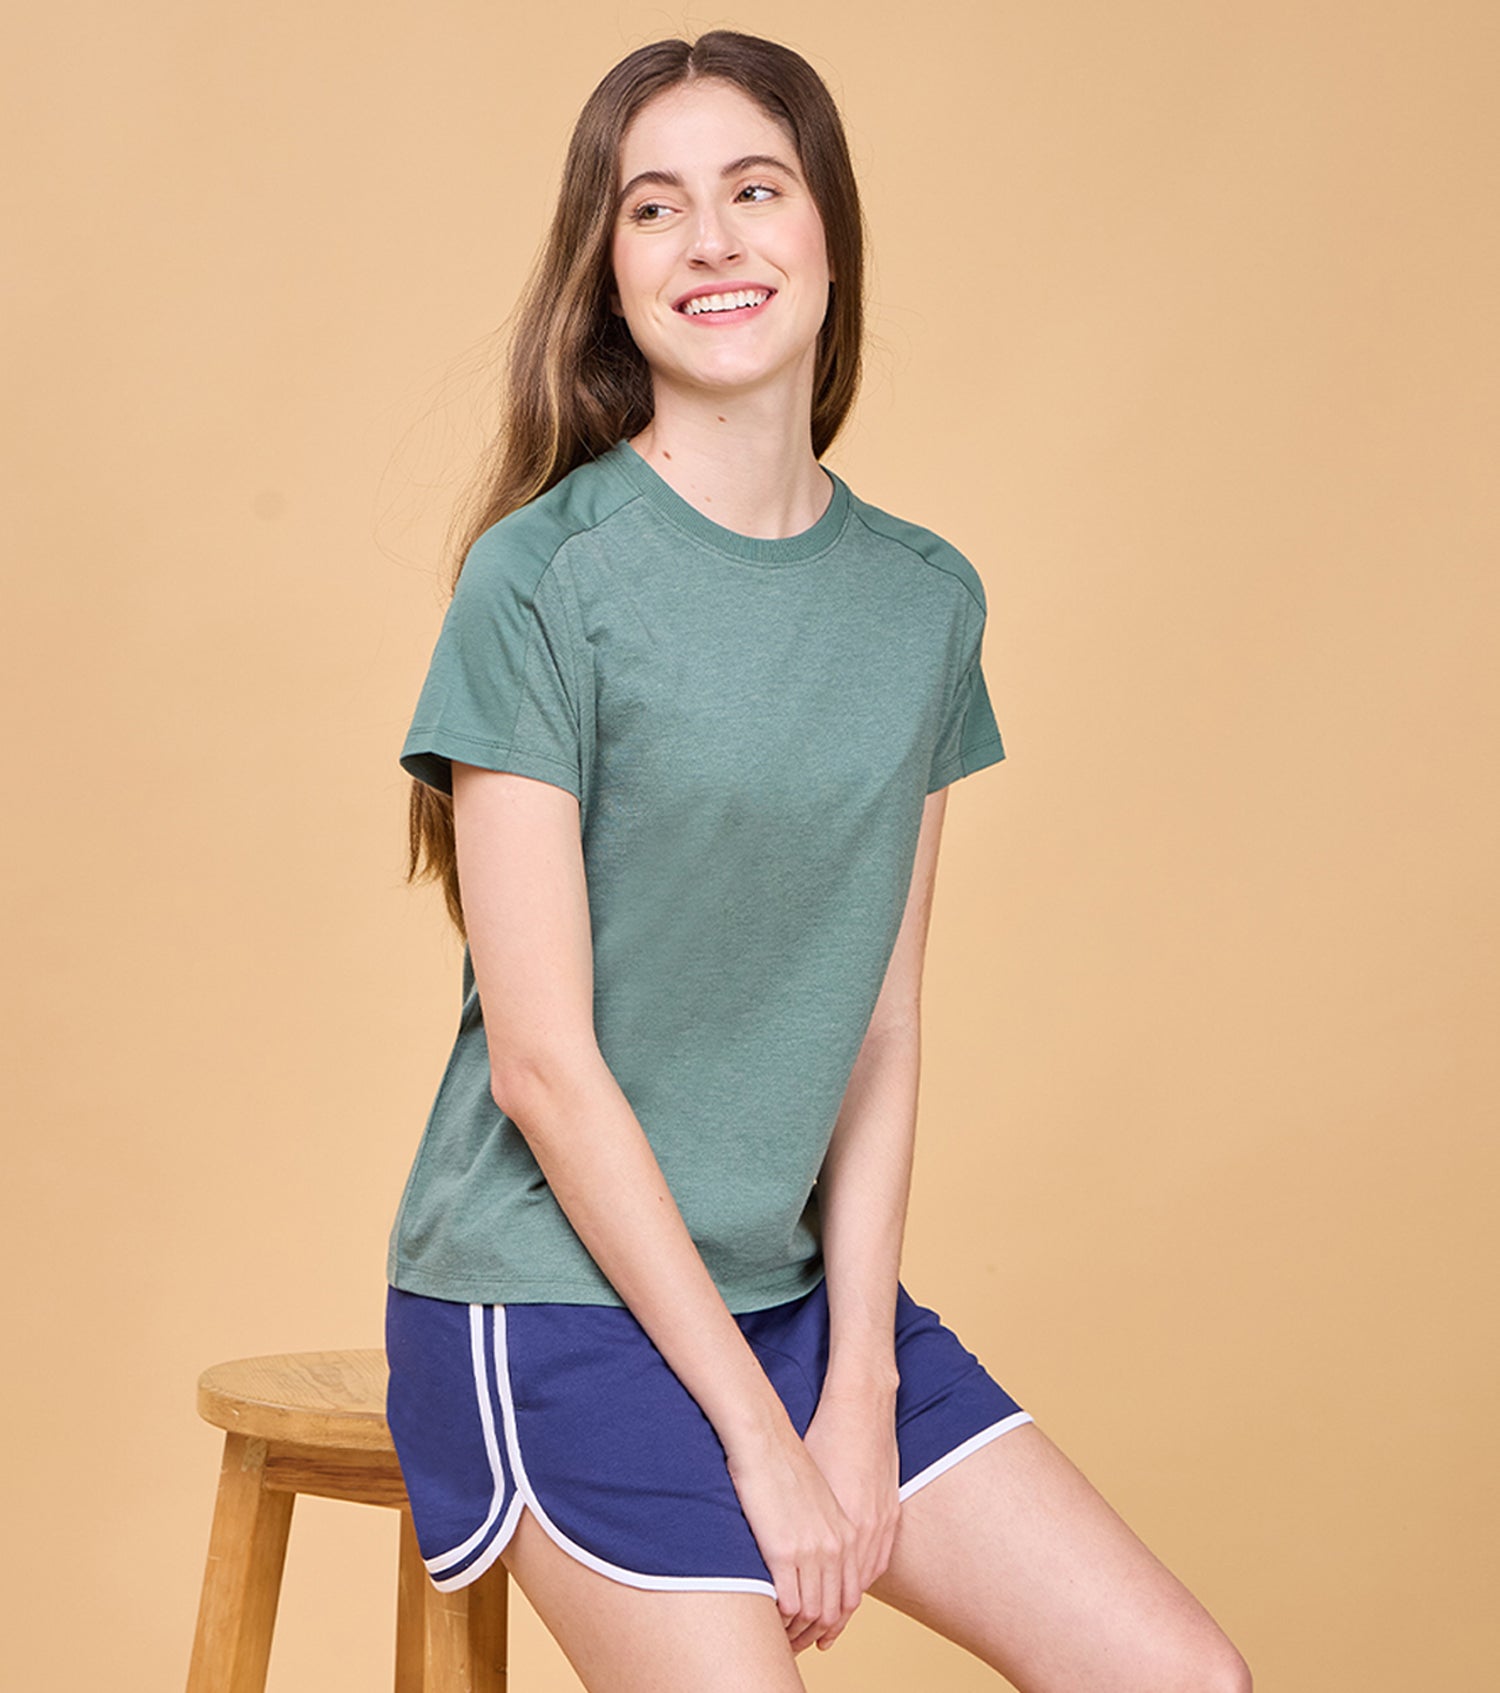 Enamor E306 Basic Cut and Sew Tee - Short Sleeve Cotton T-Shirt with Classic Cut & Sew Detail